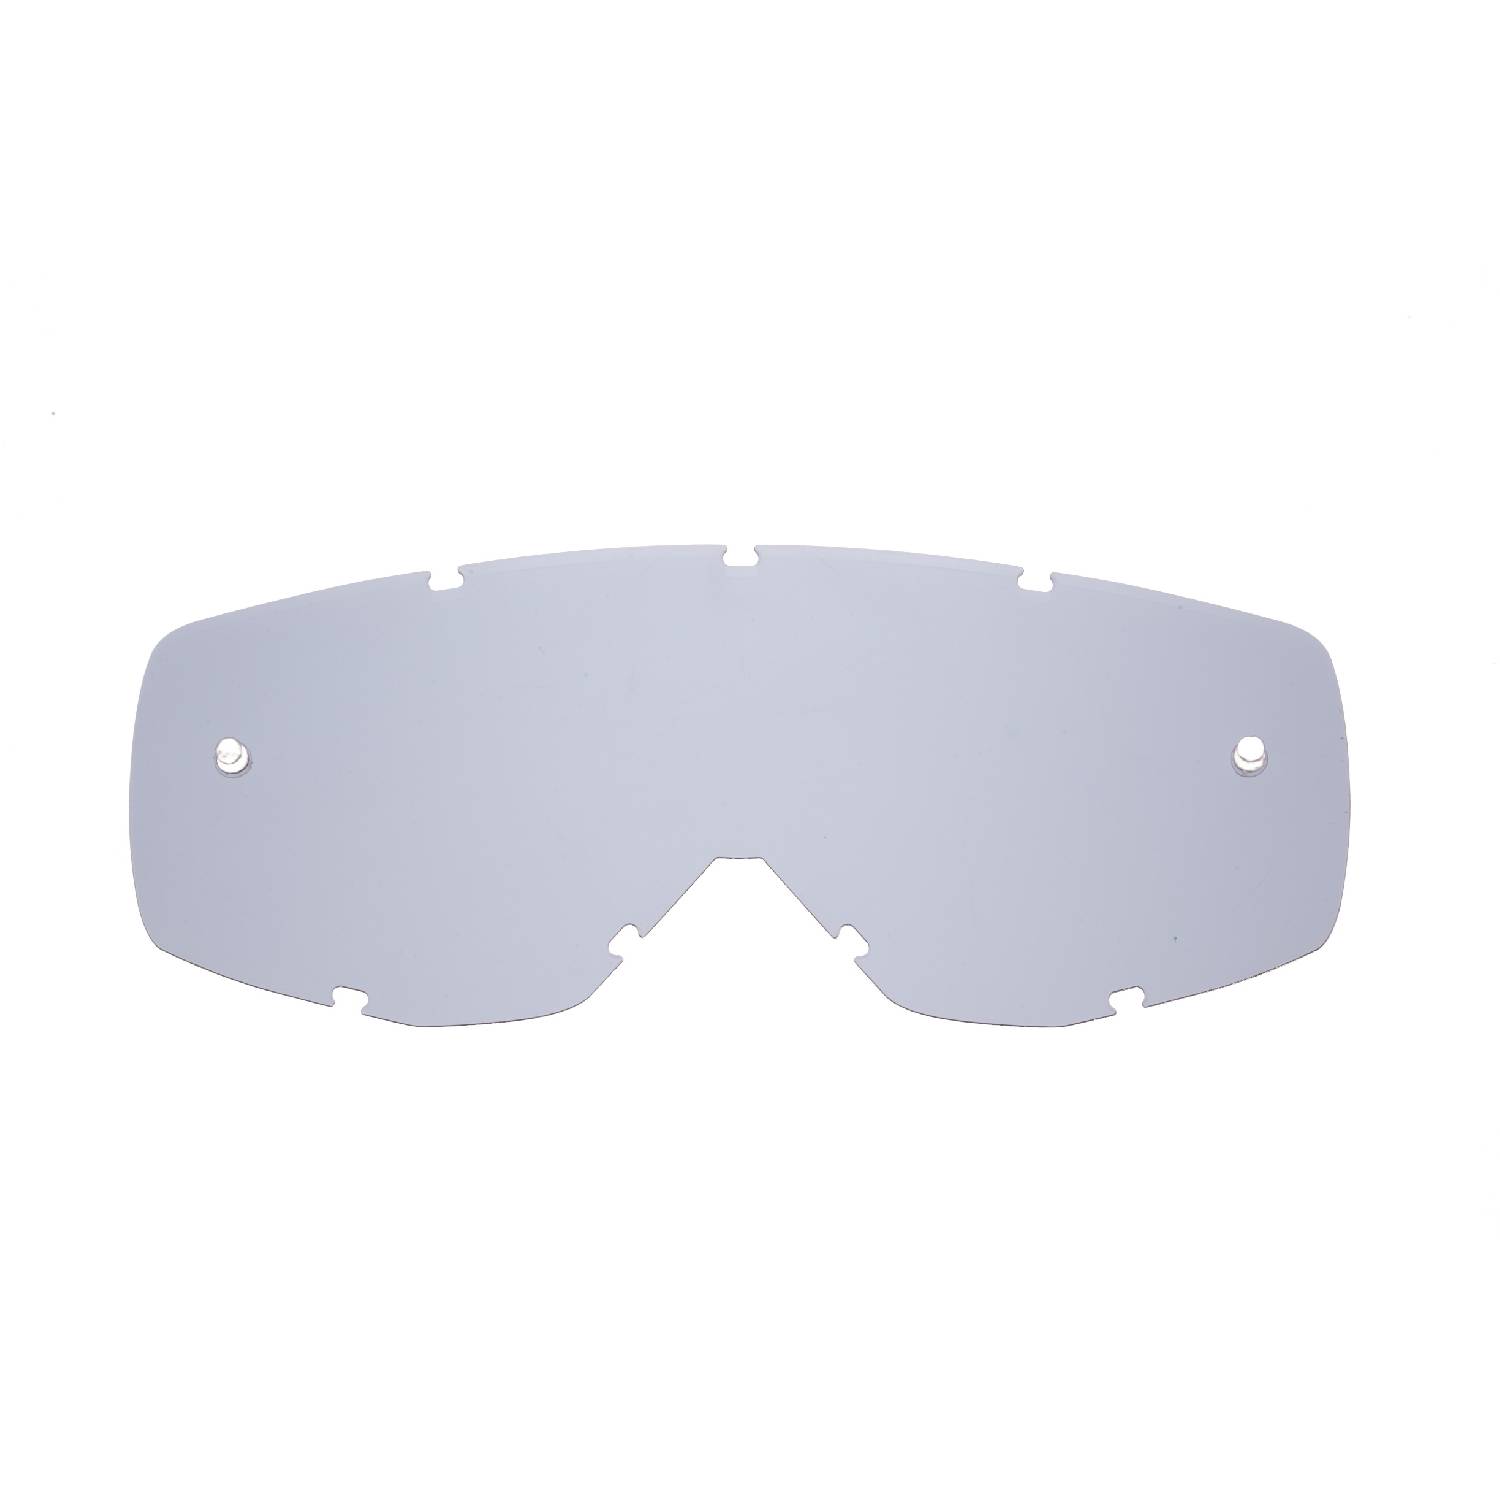 smokey replacement lenses for goggles compatible for Scott Hustle/ Primal / Tyrant / Split goggle